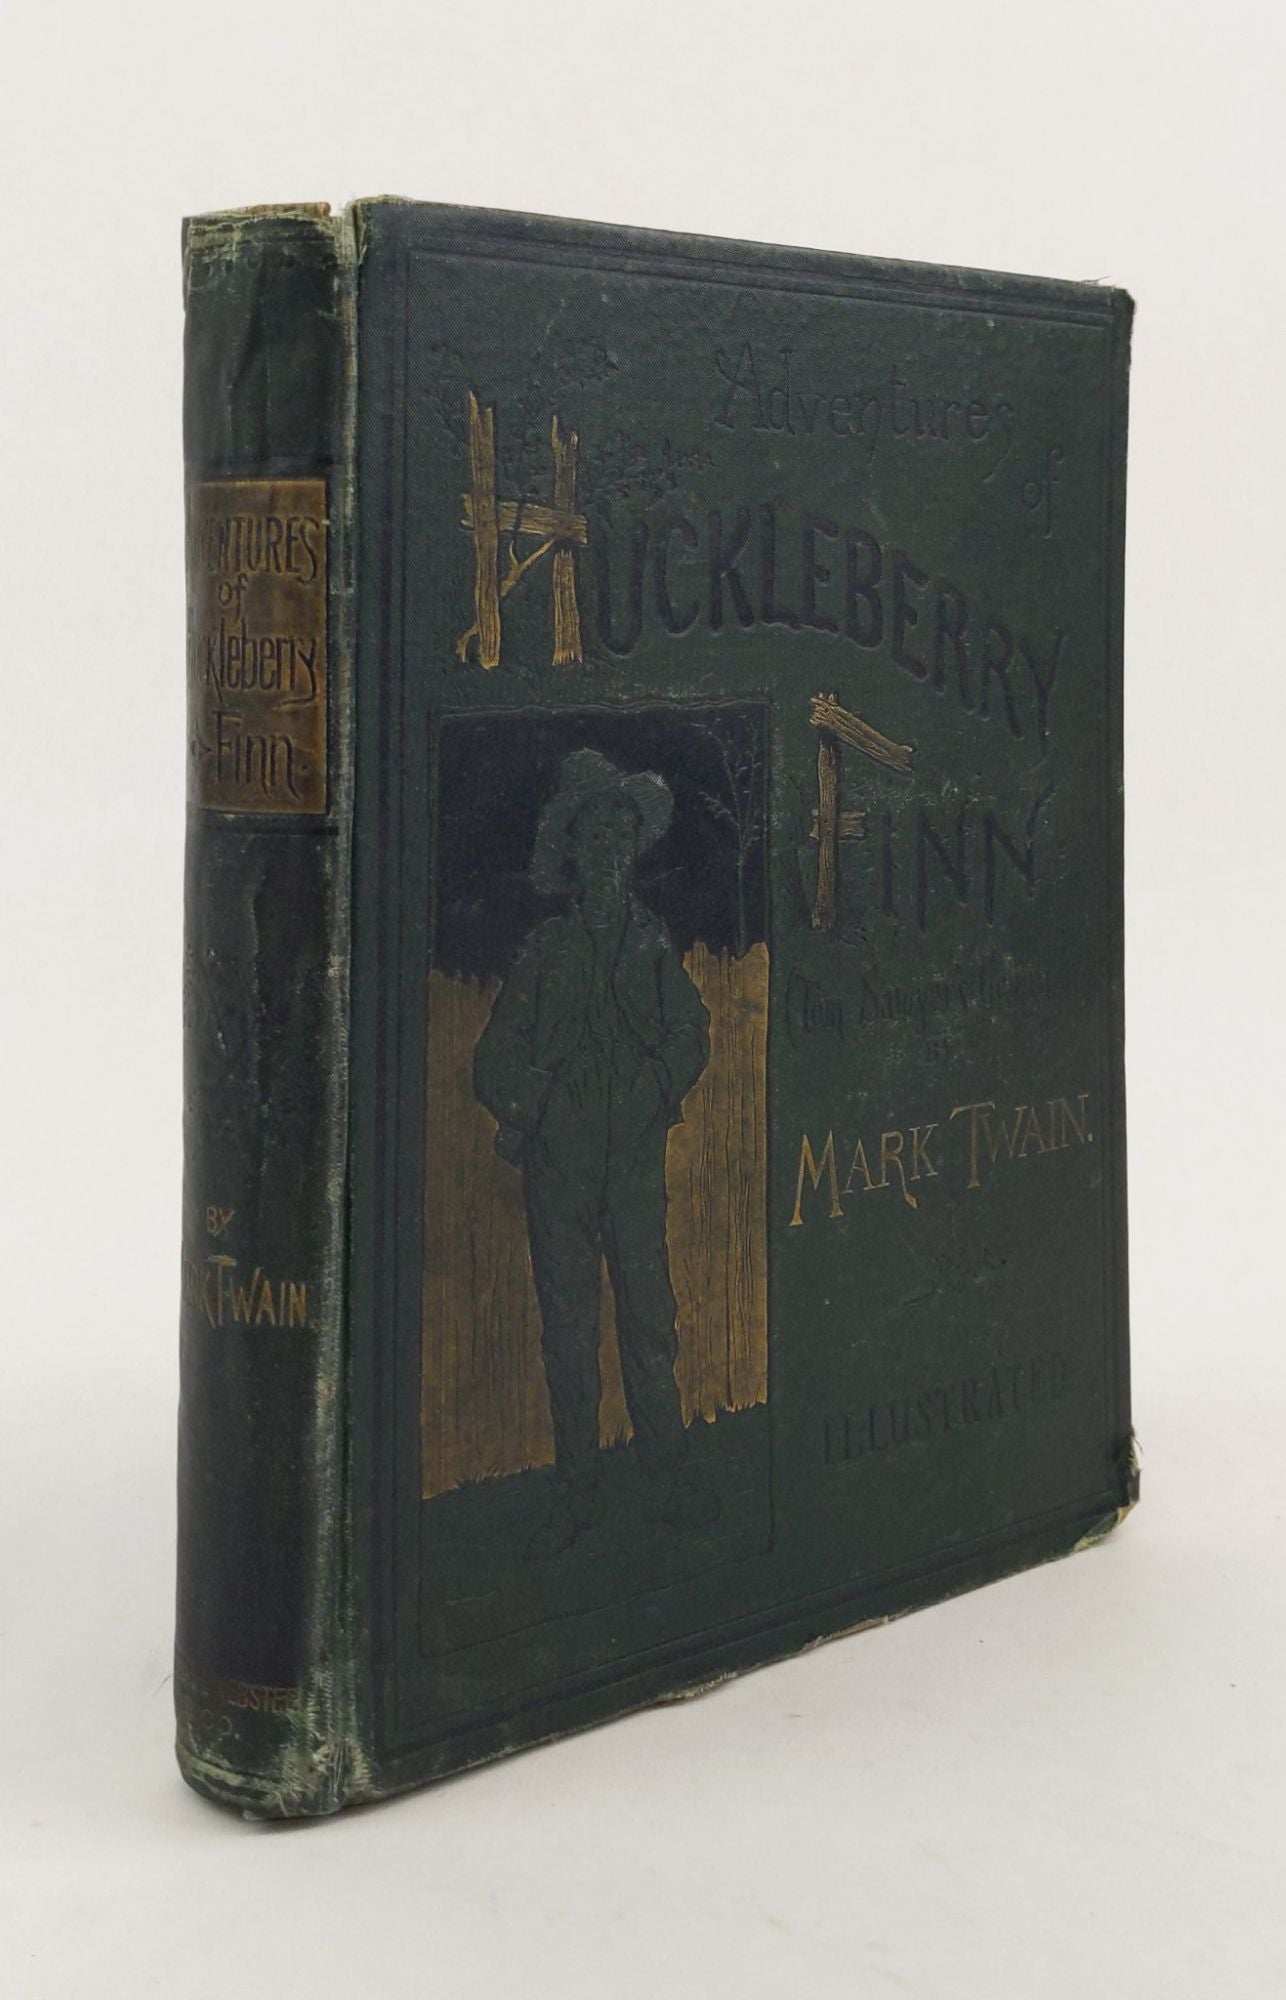 Product Image for ADVENTURES OF HUCKLEBERRY FINN (TOM SAWYER'S COMRADE)